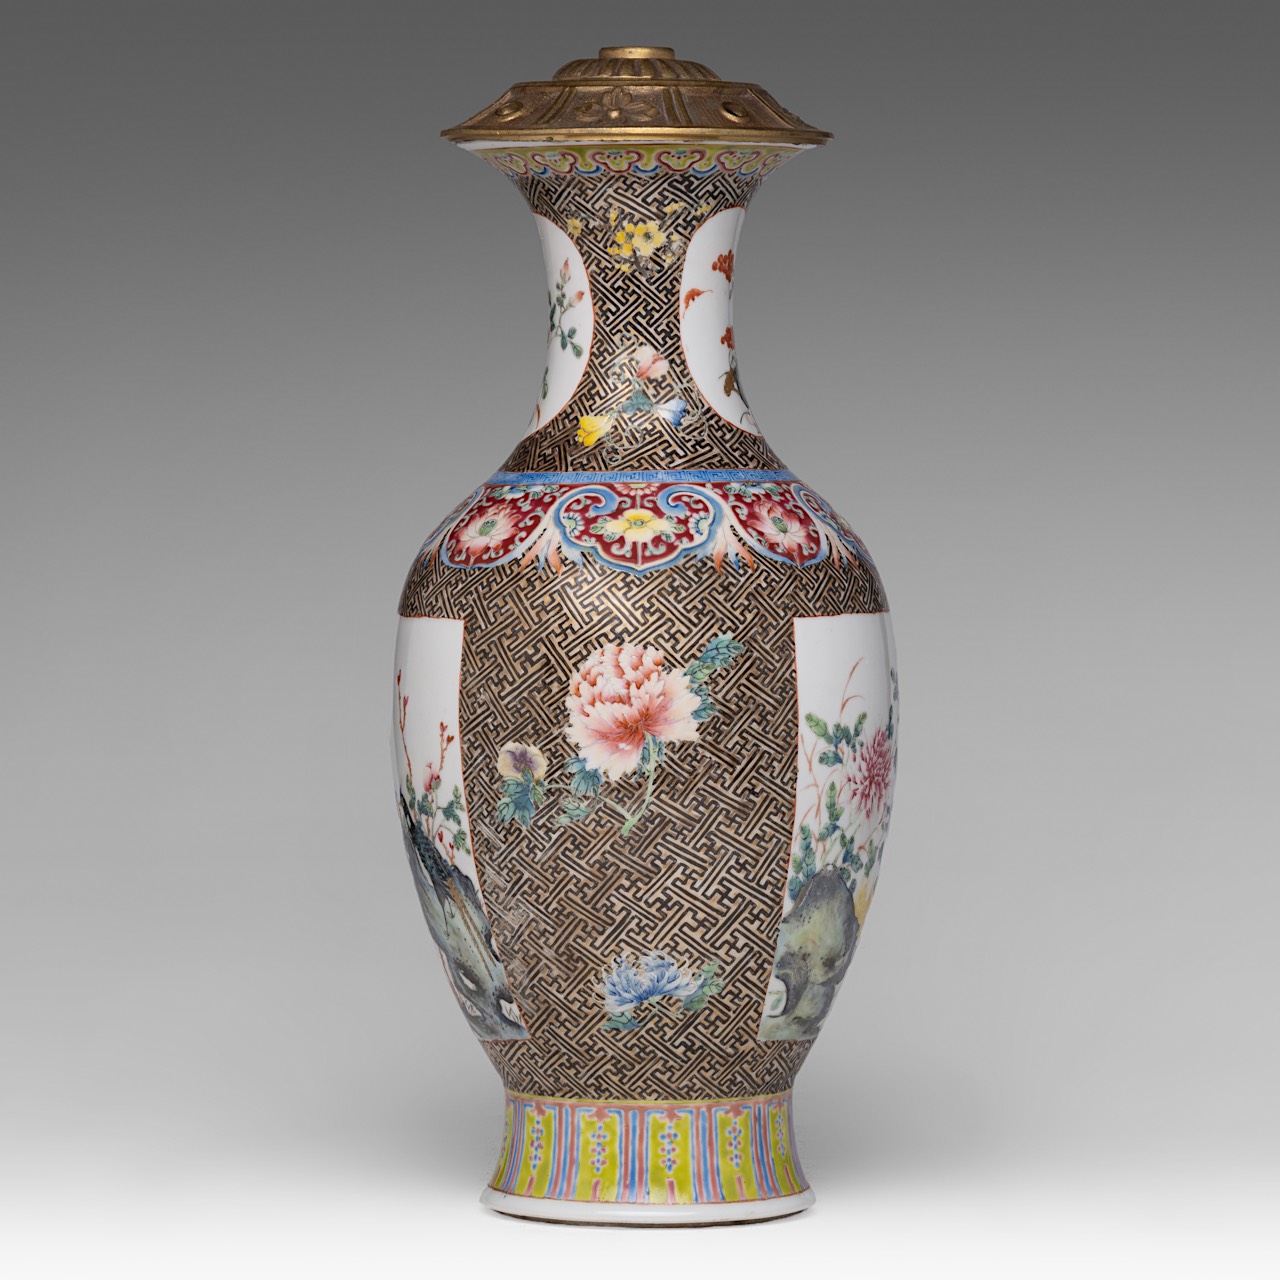 A fine Chinese famille rose 'Pheasants and Quails' baluster vase, with a Qianlong mark, late 19thC, - Image 2 of 6